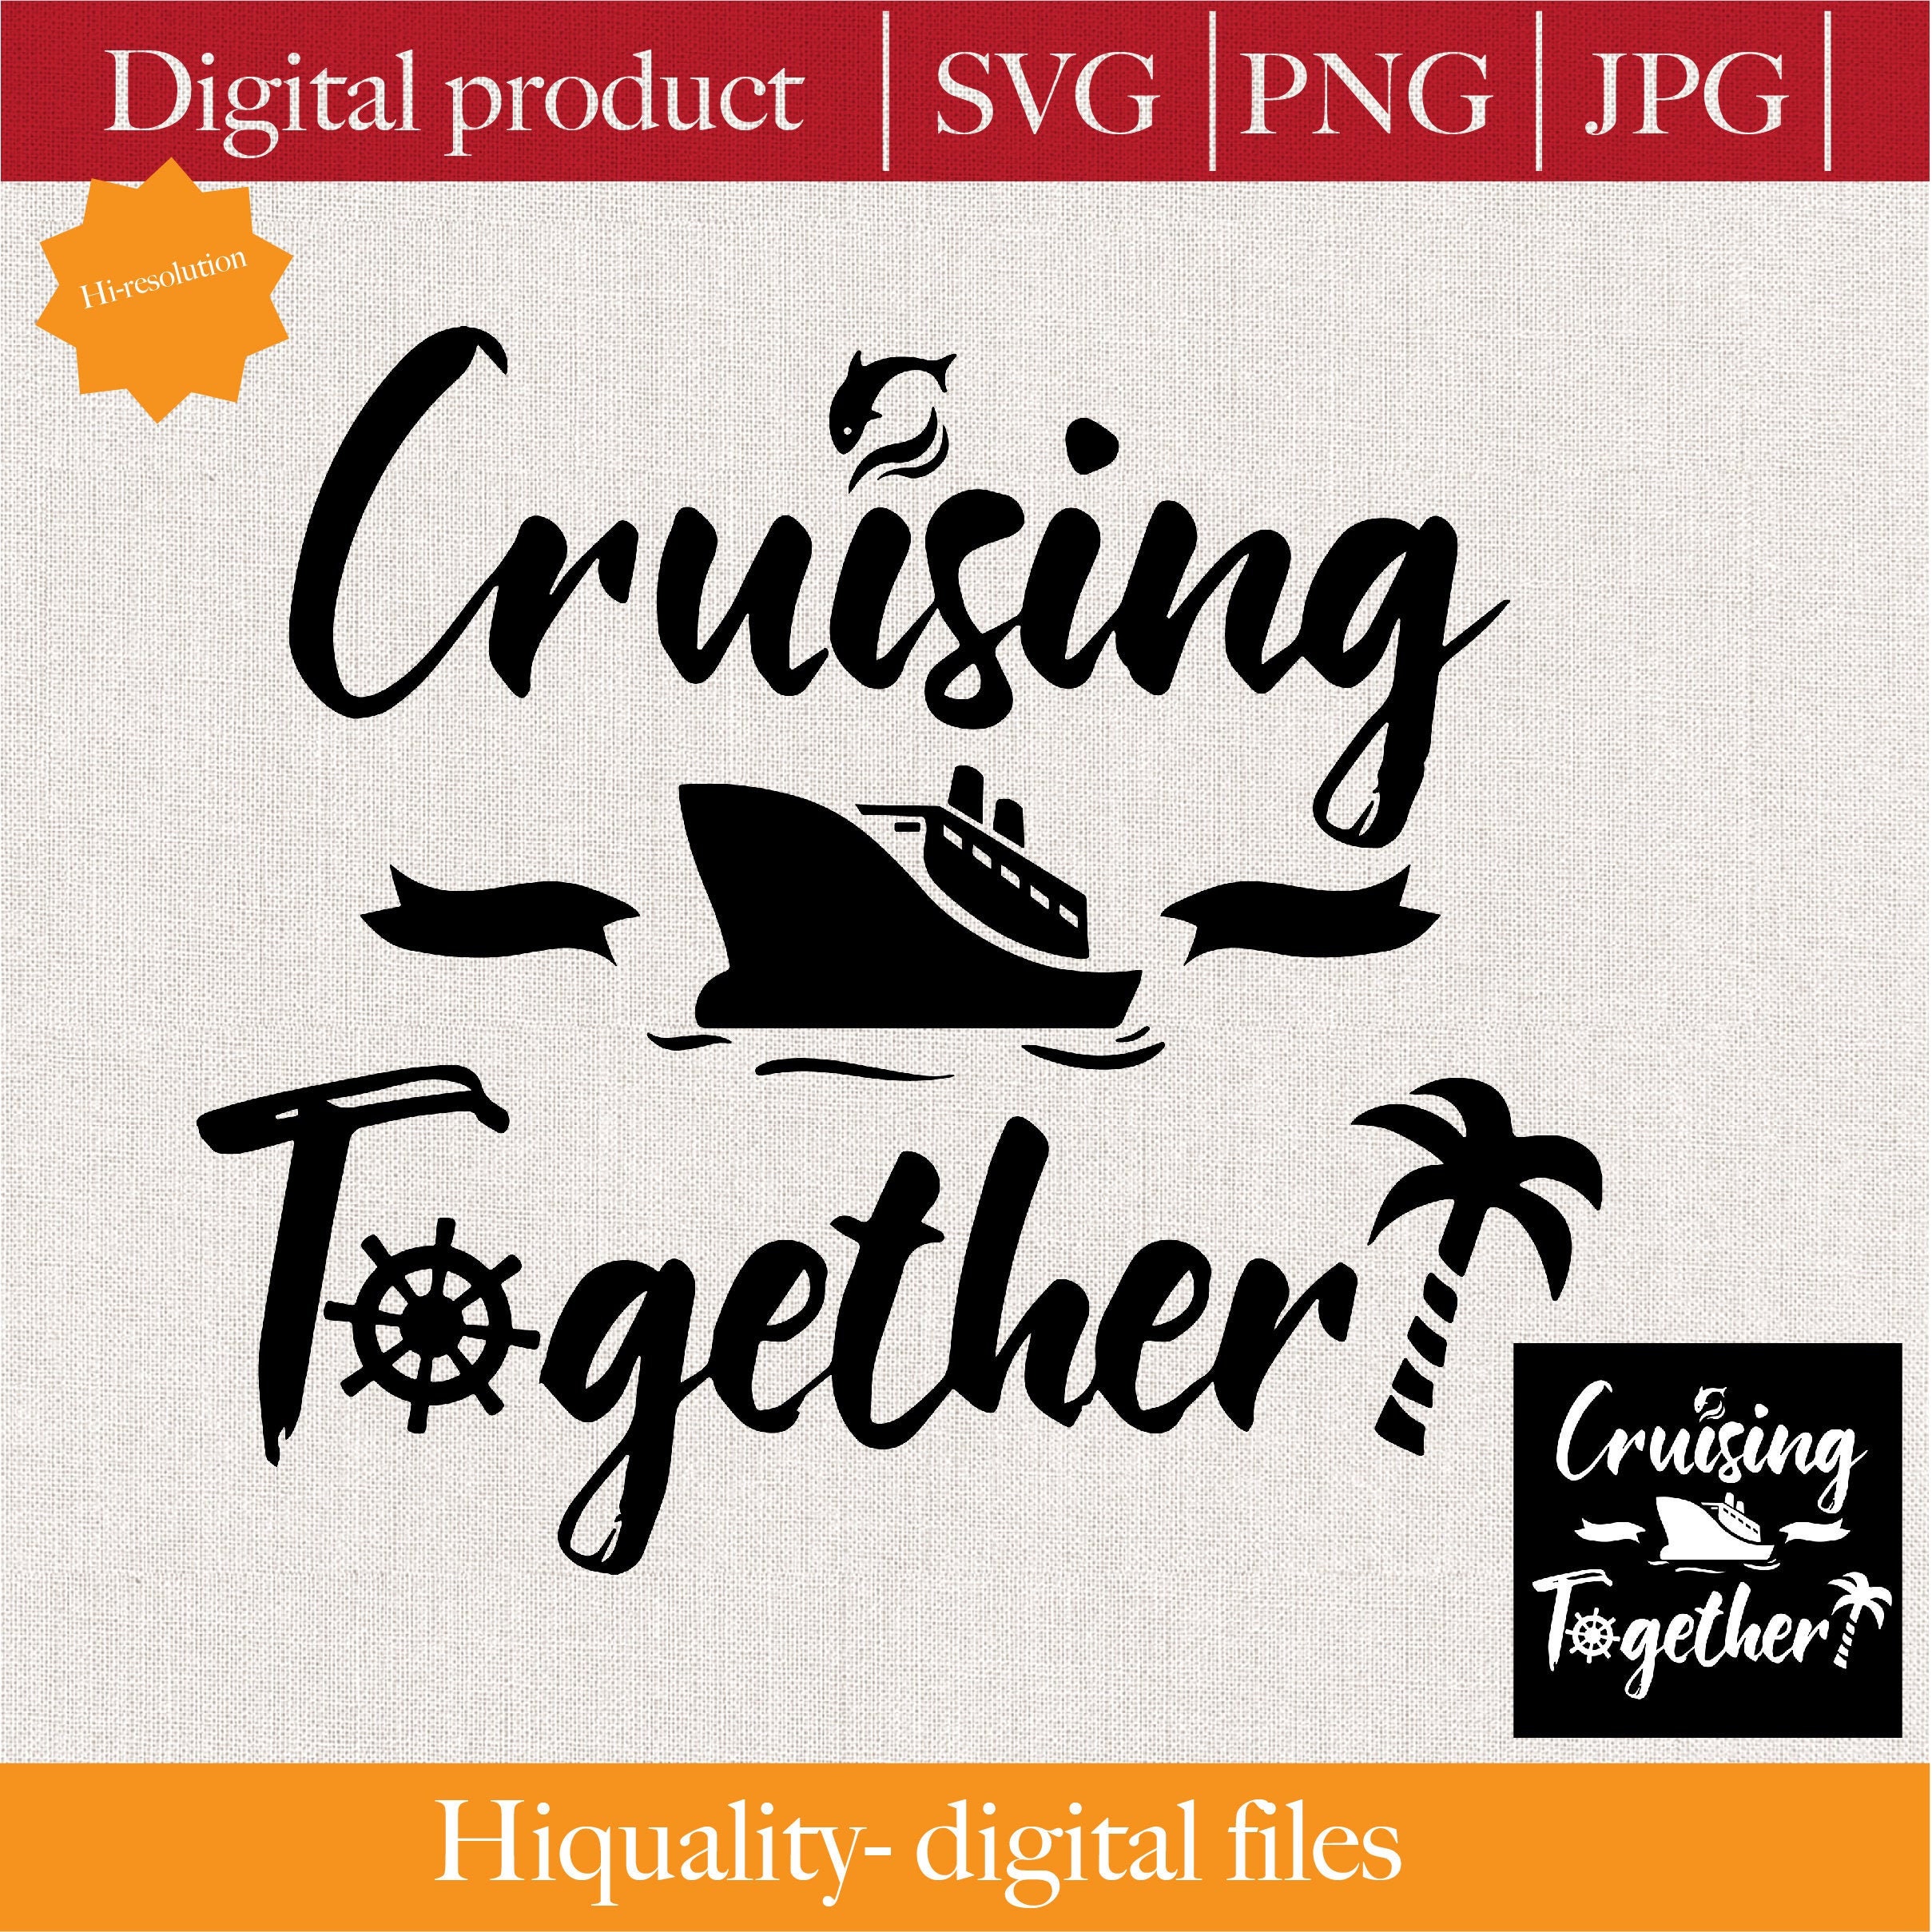 Cruising Together SVG Cruise Ship SVG Travel Vector | Etsy